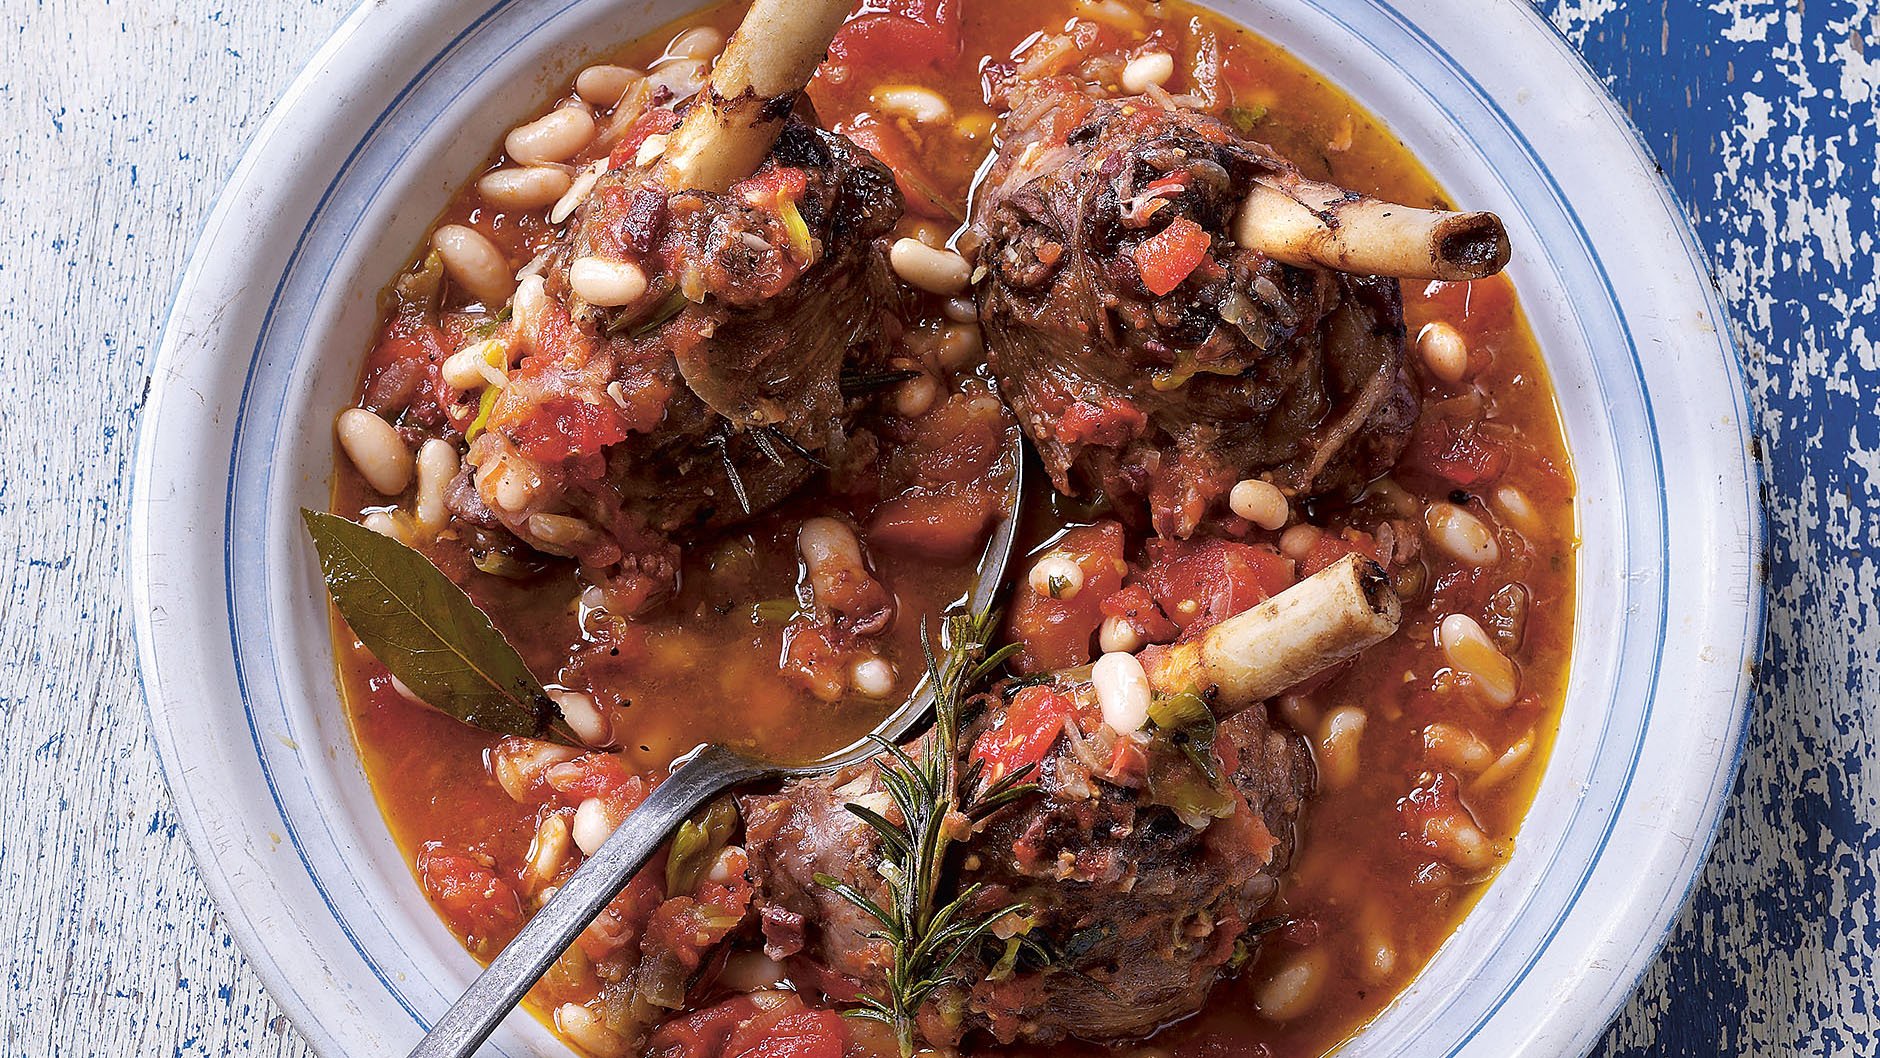 Lamb, Braised Shanks with Garlic, Rosemary and Cannellini Beans recipe